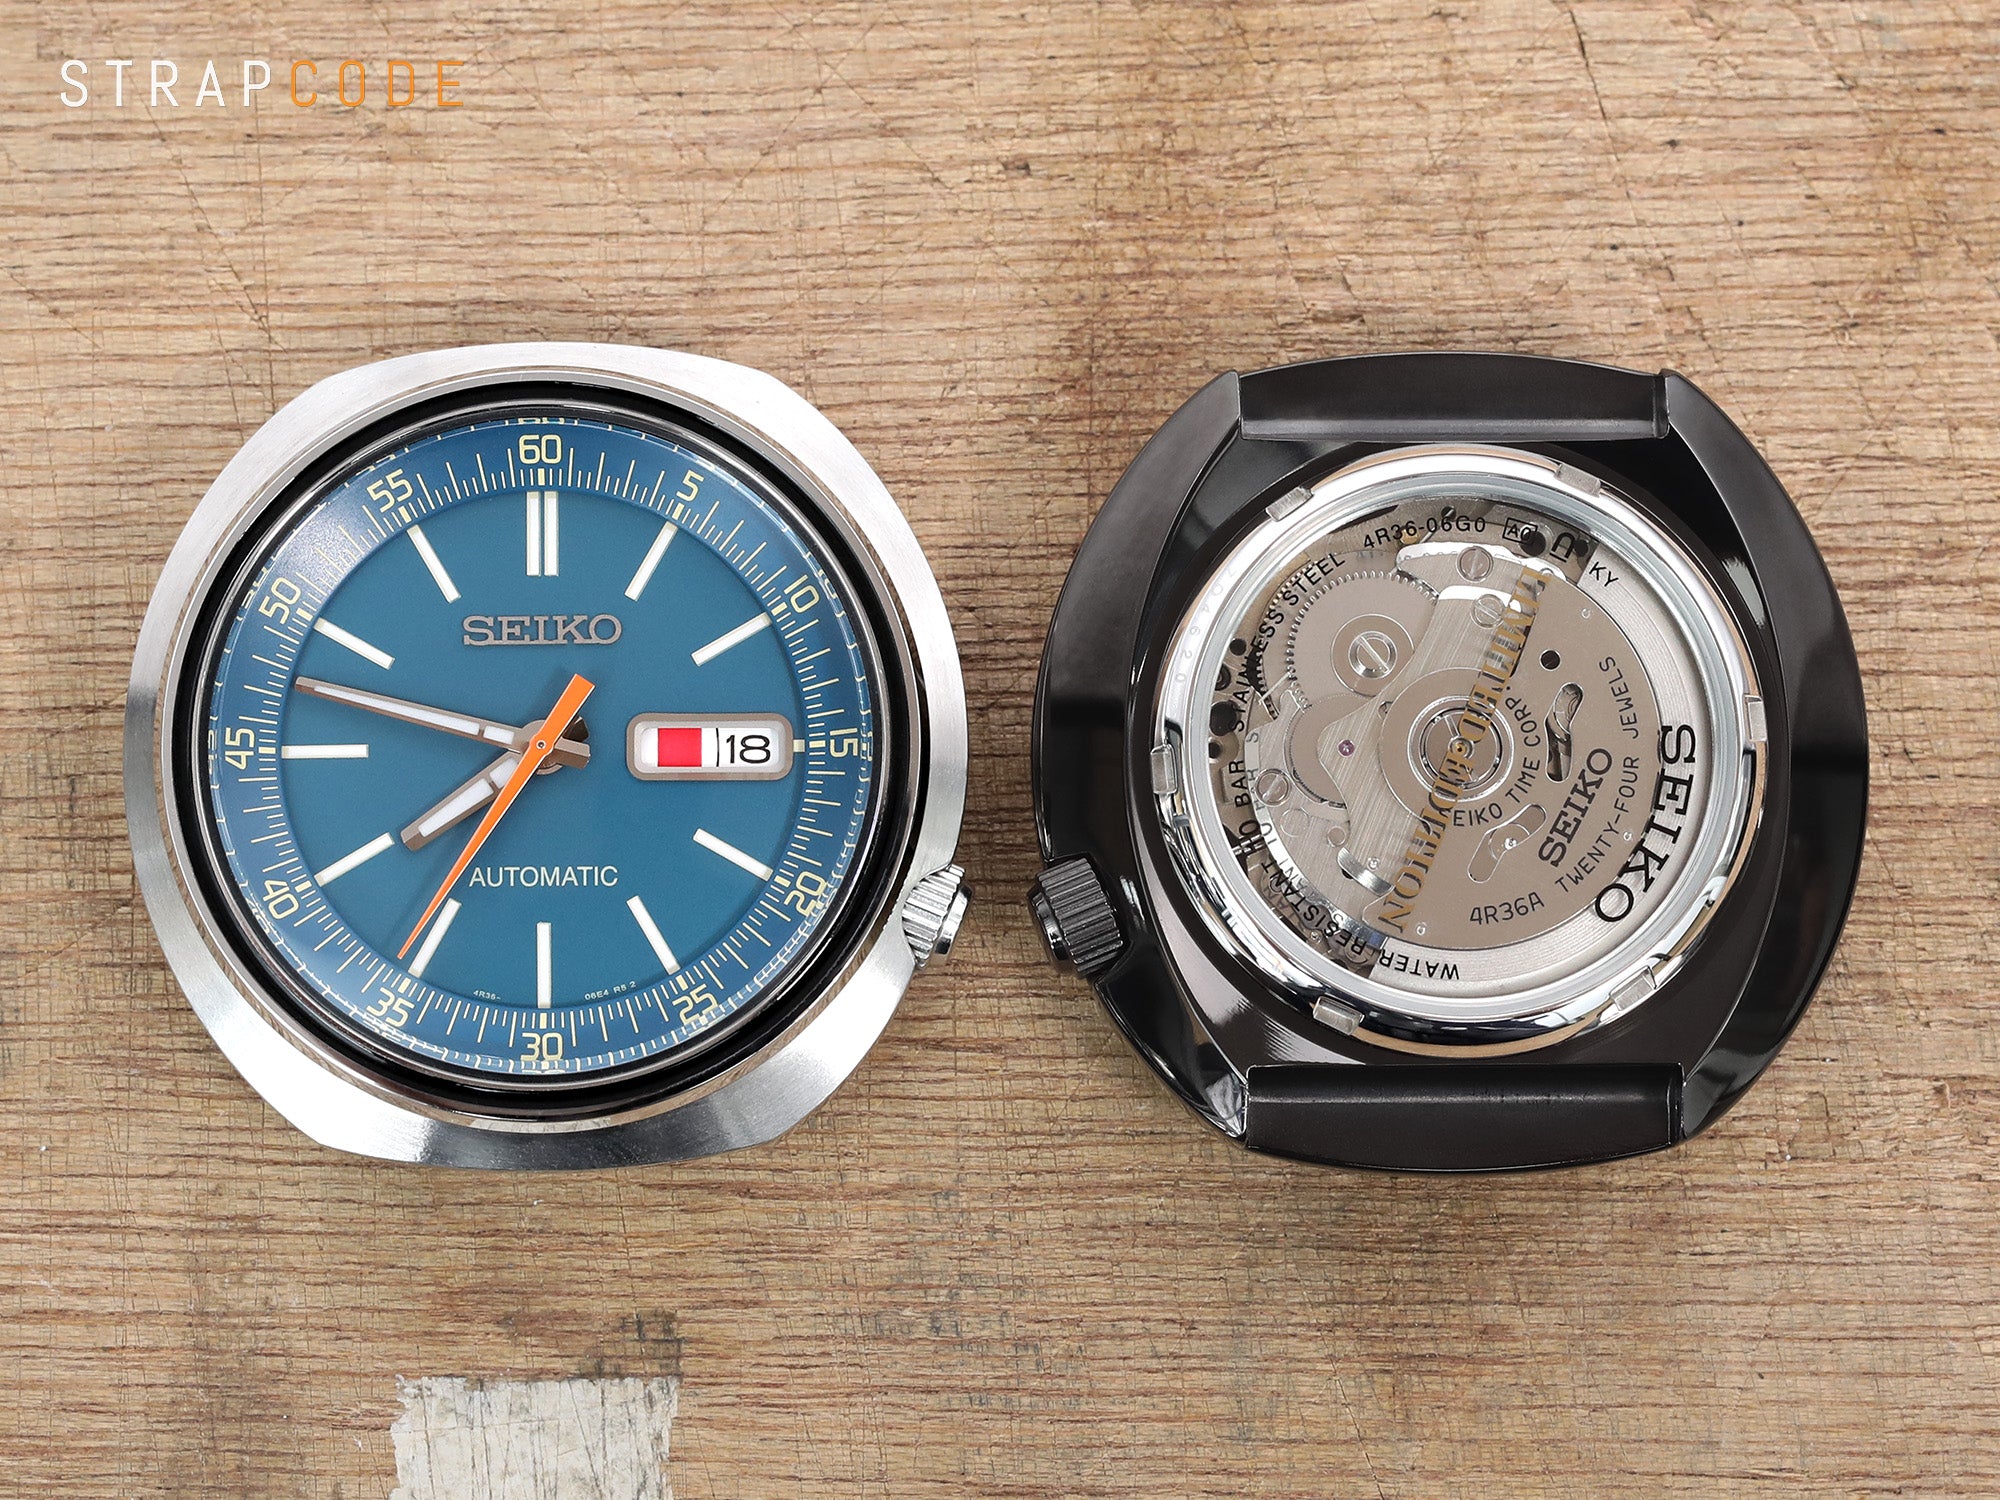 Seiko Watches With 4r36 Movement Flash Sales, 56% OFF 